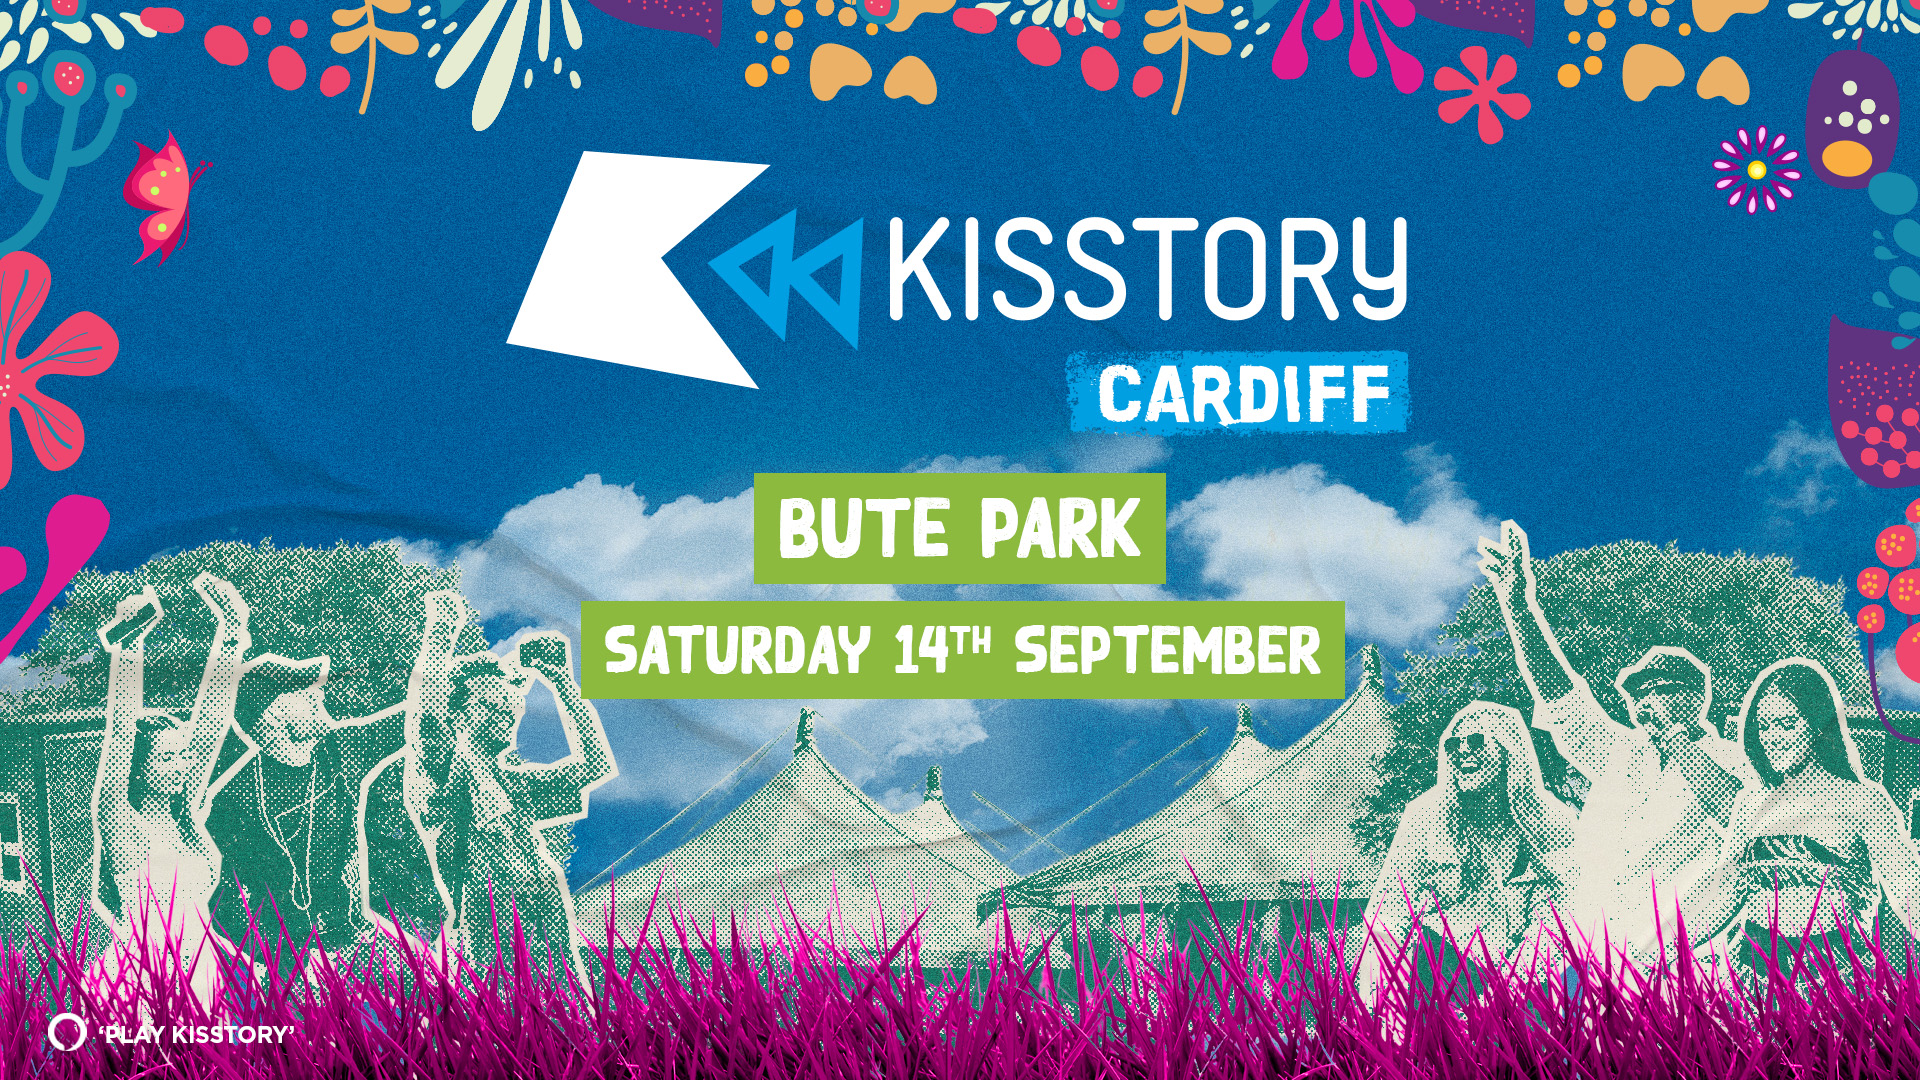 KISSTORY Cardiff: Get your tickets NOW!